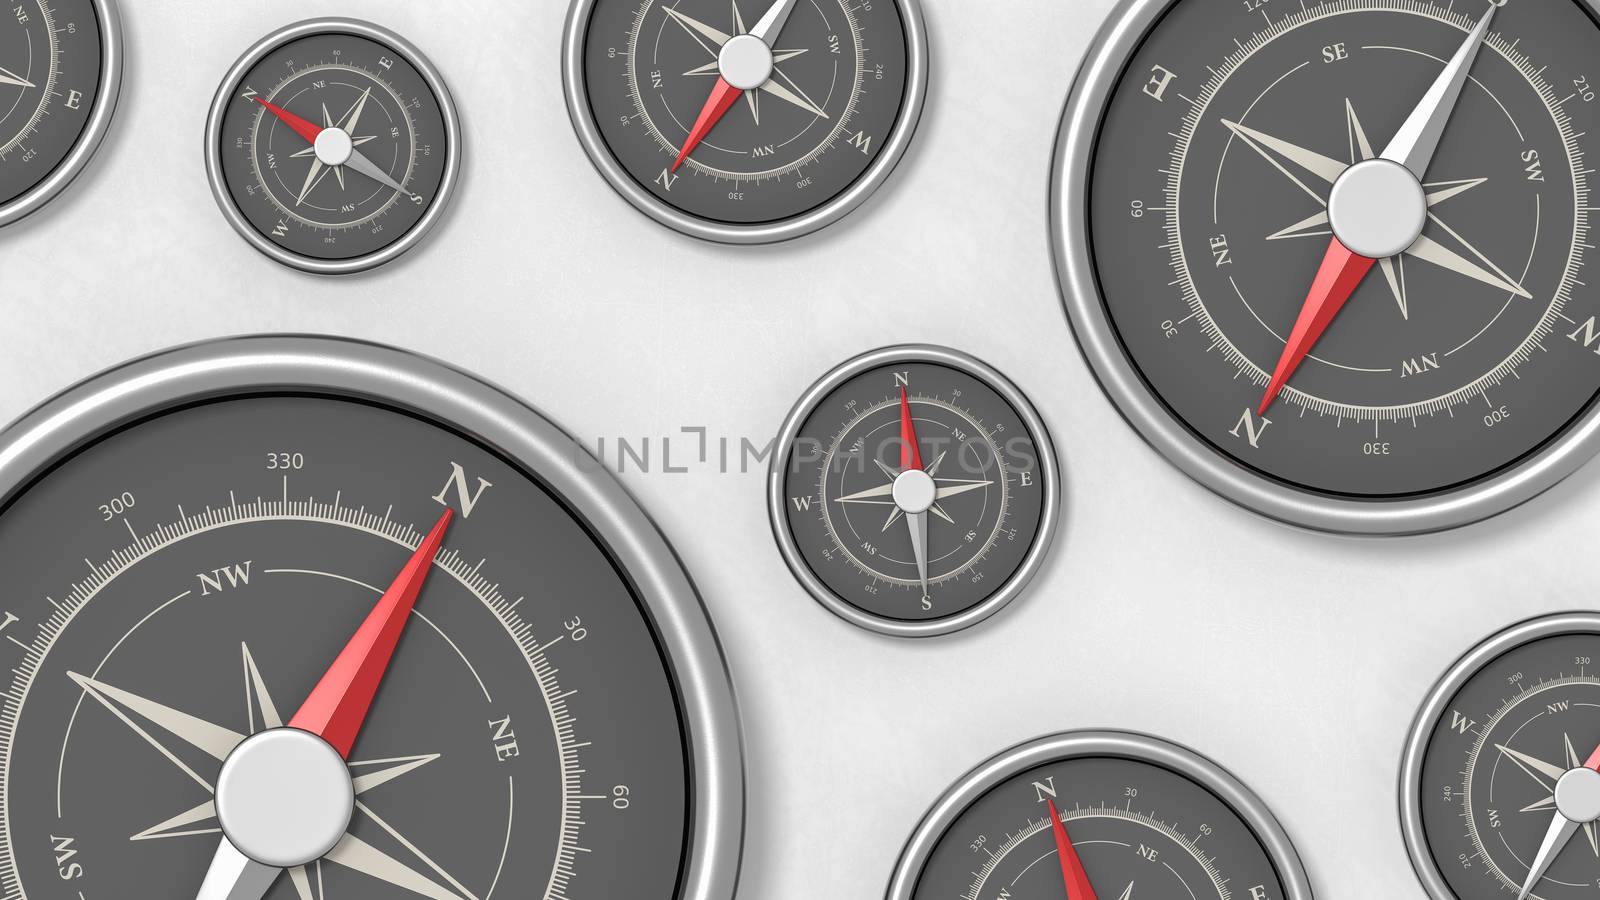 Many Metallic Compasses with Red Magnetic Needle Pointing in Different Directions on a Light Gray Plastered Background 3D Illustration